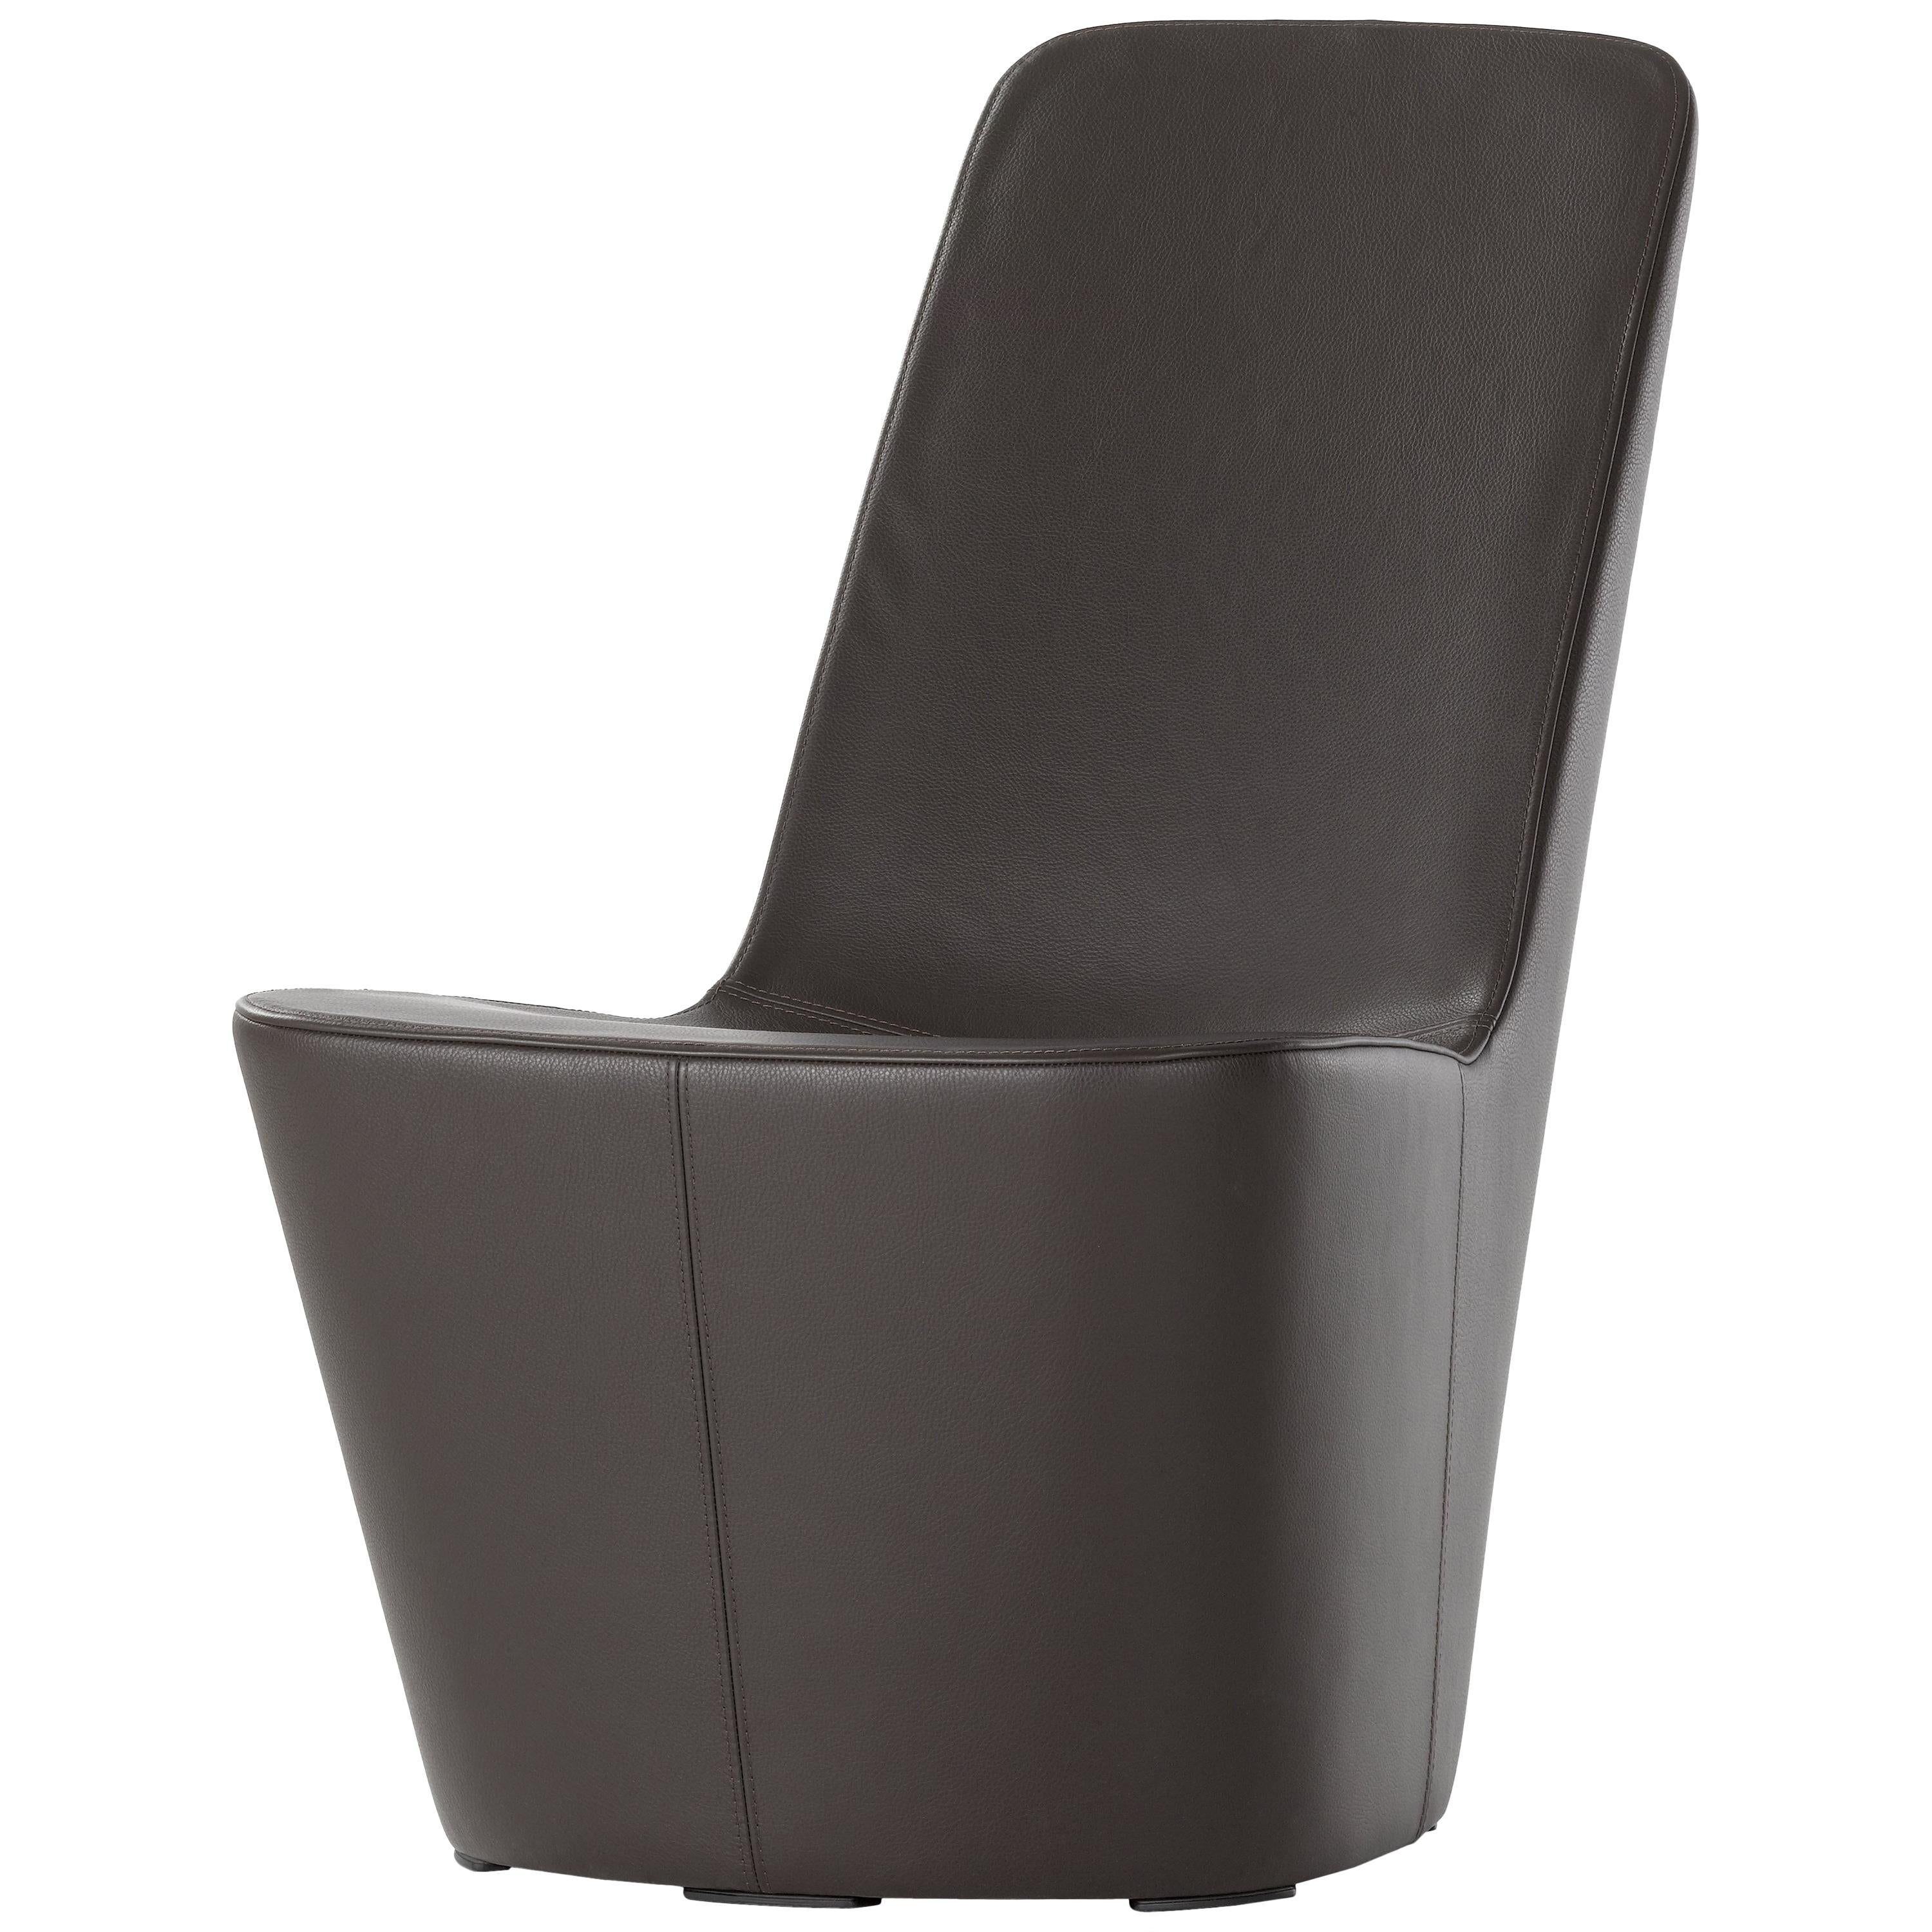 Vitra Monopod Chair in Chocolate Leather by Jasper Morrison im Angebot